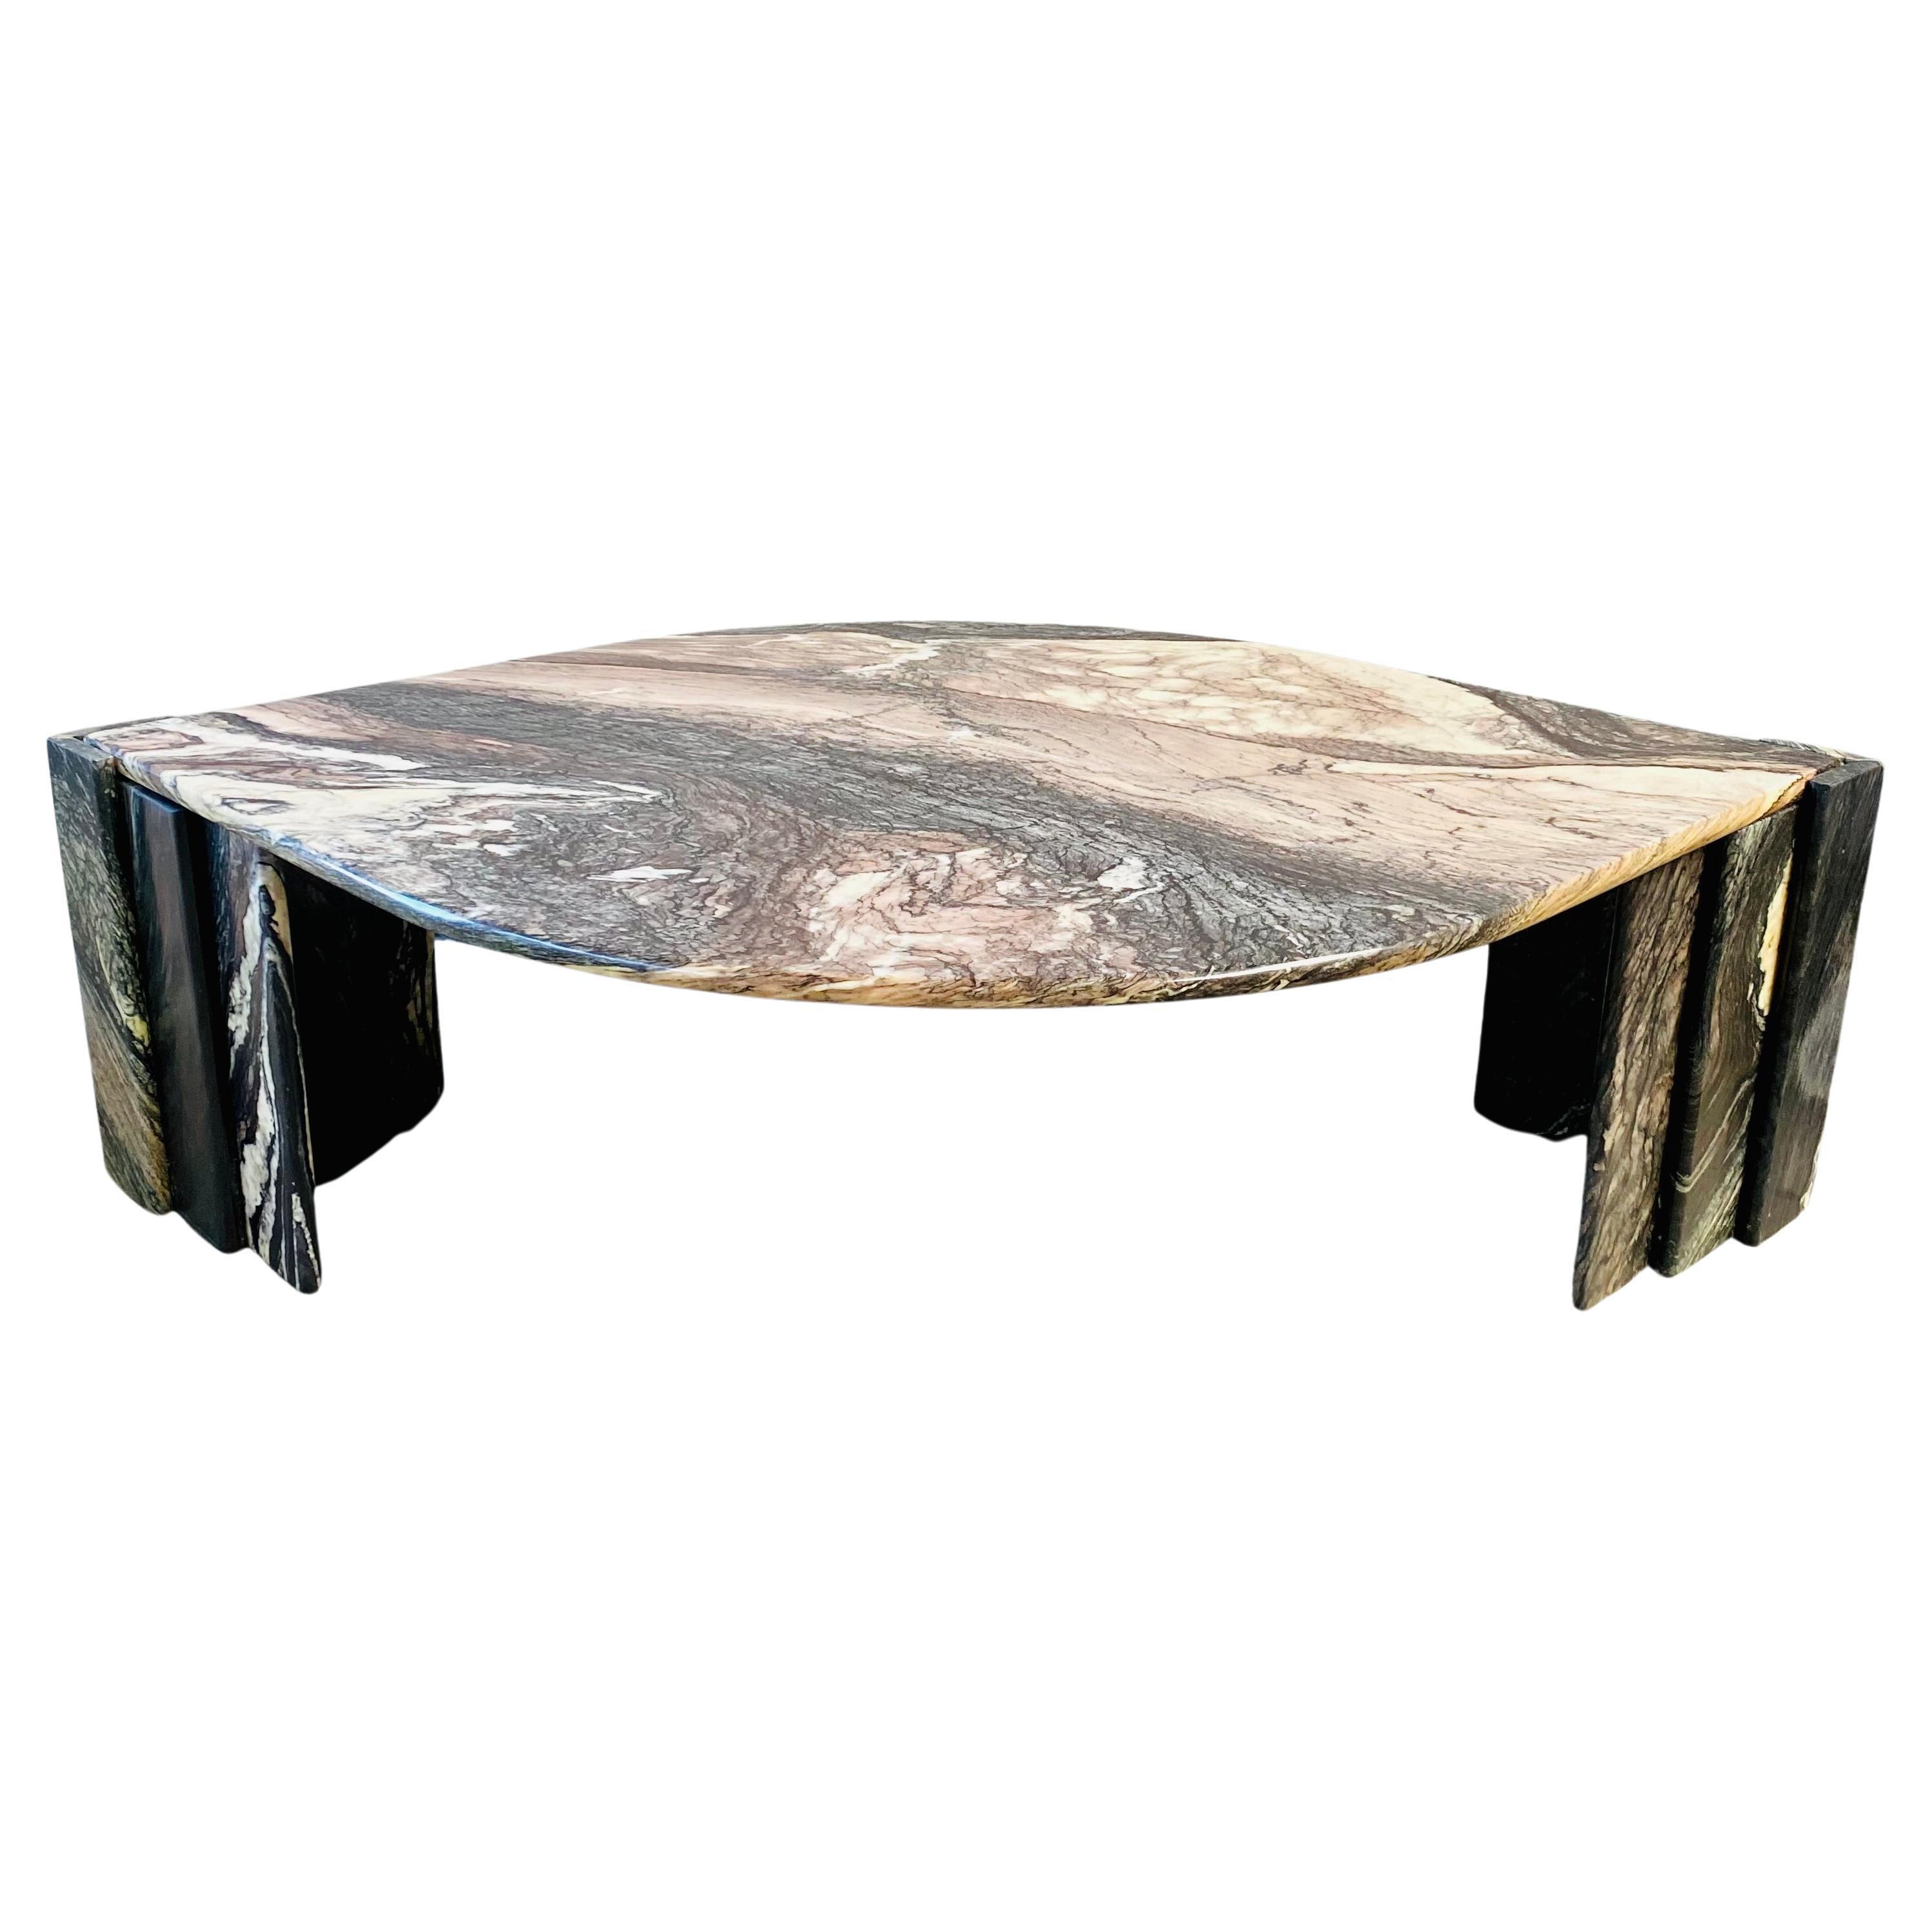 Looking for a stunning coffee table that blends modern design with Italian luxury? Look no further than the Cippolino marble Coffee Table 